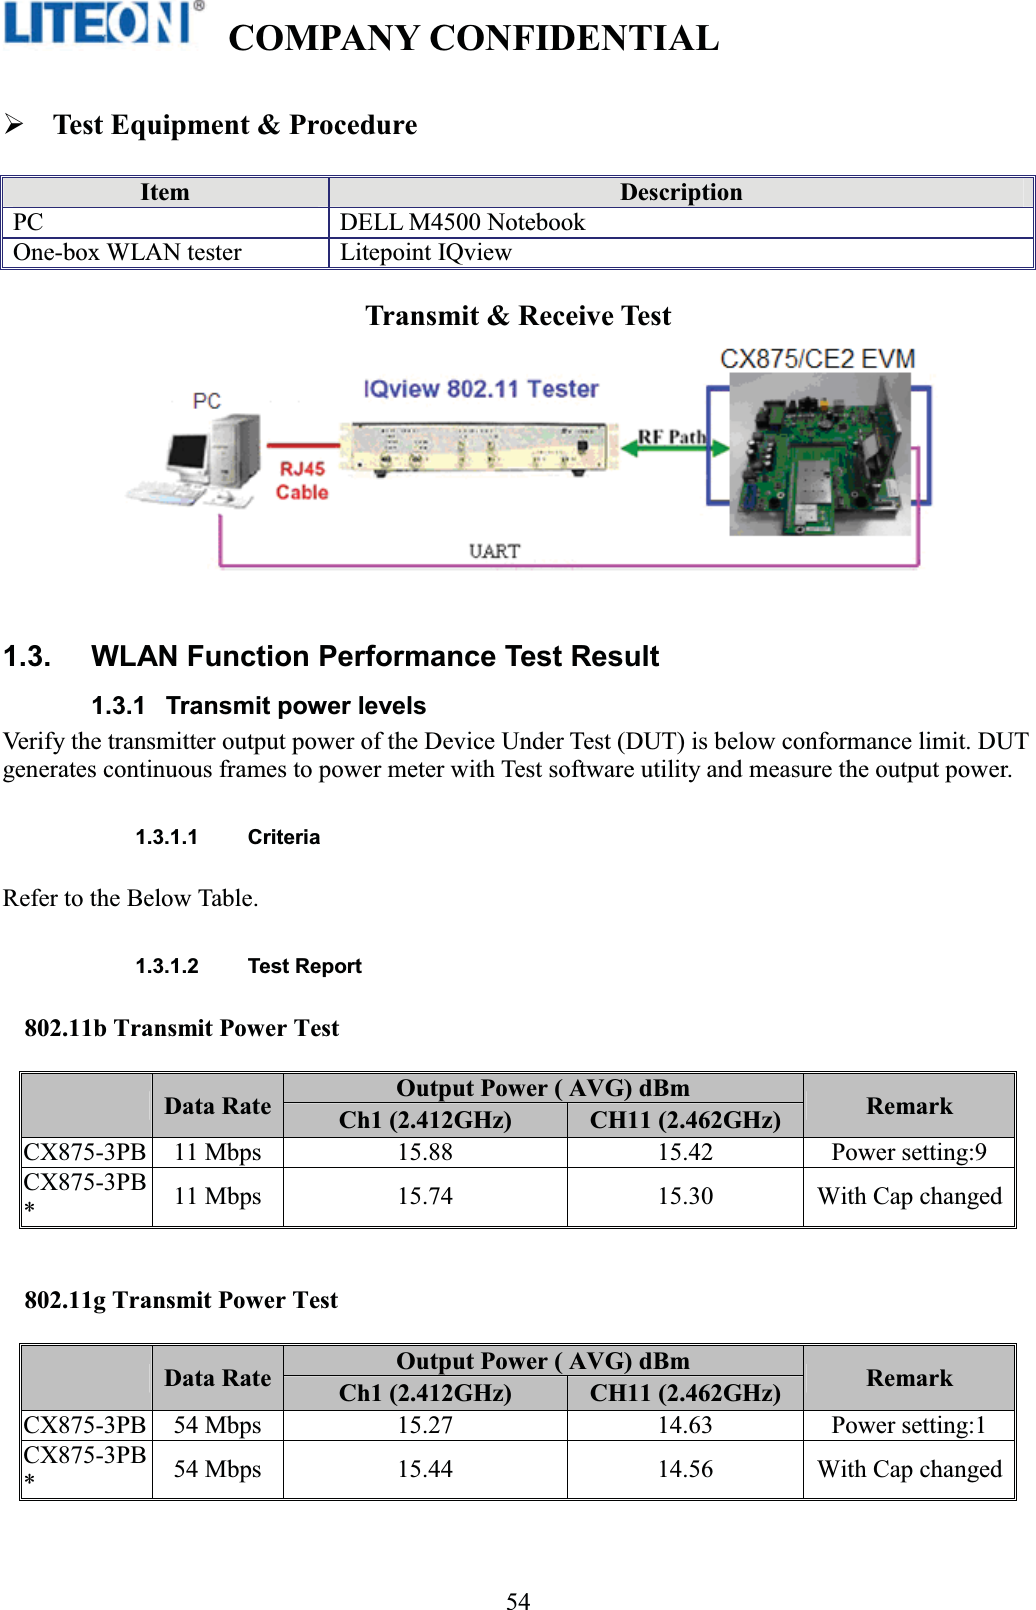   COMPANY CONFIDENTIAL   !54Test Equipment &amp; Procedure Item  Description PC  DELL M4500 Notebook One-box WLAN tester  Litepoint IQview Transmit &amp; Receive Test 1.3.  WLAN Function Performance Test Result 1.3.1  Transmit power levels Verify the transmitter output power of the Device Under Test (DUT) is below conformance limit. DUT generates continuous frames to power meter with Test software utility and measure the output power. 1.3.1.1 Criteria Refer to the Below Table. 1.3.1.2 Test Report 802.11b Transmit Power Test Data Rate Output Power ( AVG) dBm  Remark Ch1 (2.412GHz)  CH11 (2.462GHz) CX875-3PB 11 Mbps  15.88 15.42  Power setting:9 CX875-3PB*11 Mbps  15.74 15.30  With Cap changed802.11g Transmit Power Test Data Rate Output Power ( AVG) dBm  Remark Ch1 (2.412GHz)  CH11 (2.462GHz) CX875-3PB 54 Mbps  15.27 14.63  Power setting:1 CX875-3PB*54 Mbps  15.44 14.56  With Cap changed